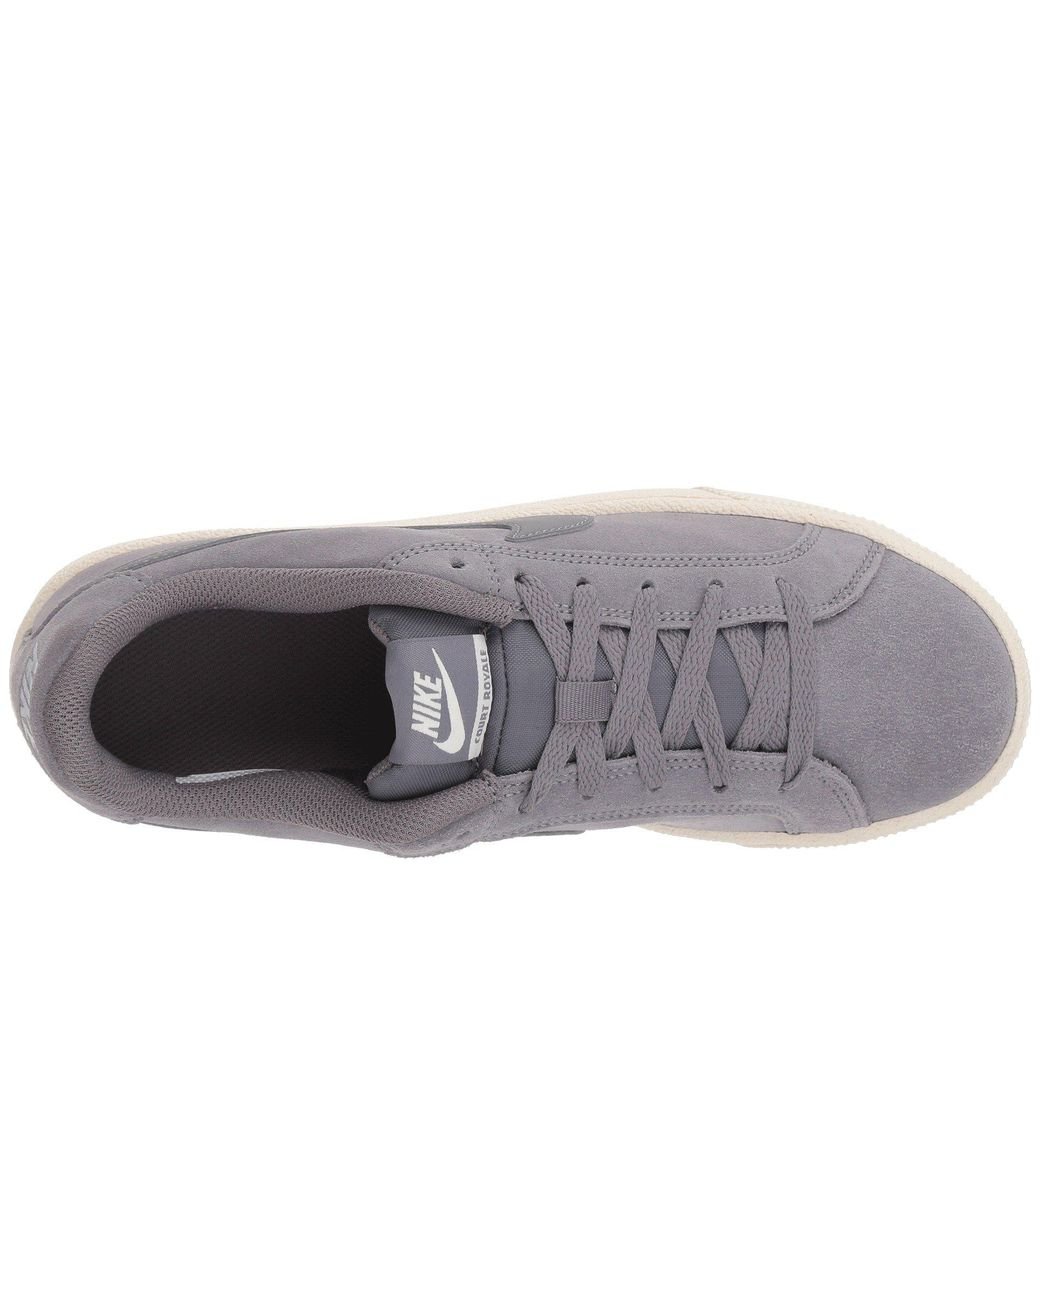 Nike Court Royale Suede (black/black/thunder Grey) Women's Shoes in Gray |  Lyst